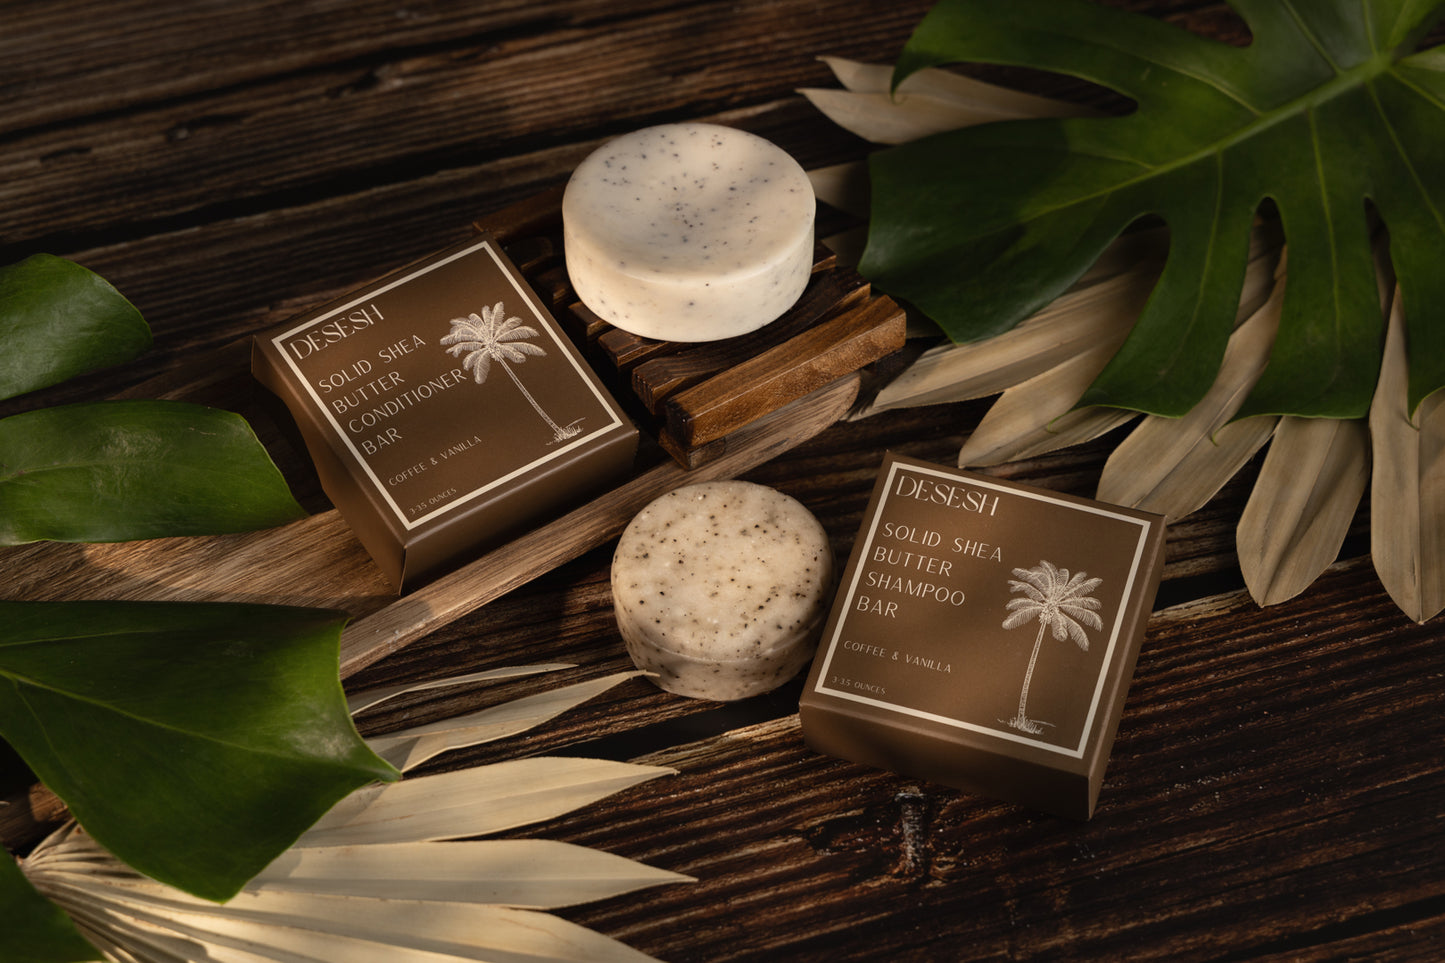 This image shows salon quality Shea Butter solid shampoo bars with plastic free biodegradable packaging for a more sustainable eco friendly zero waste hair care routine. Shown here are the coffee and vanilla solid shampoo and conditioner bars with their biodegradable packaging